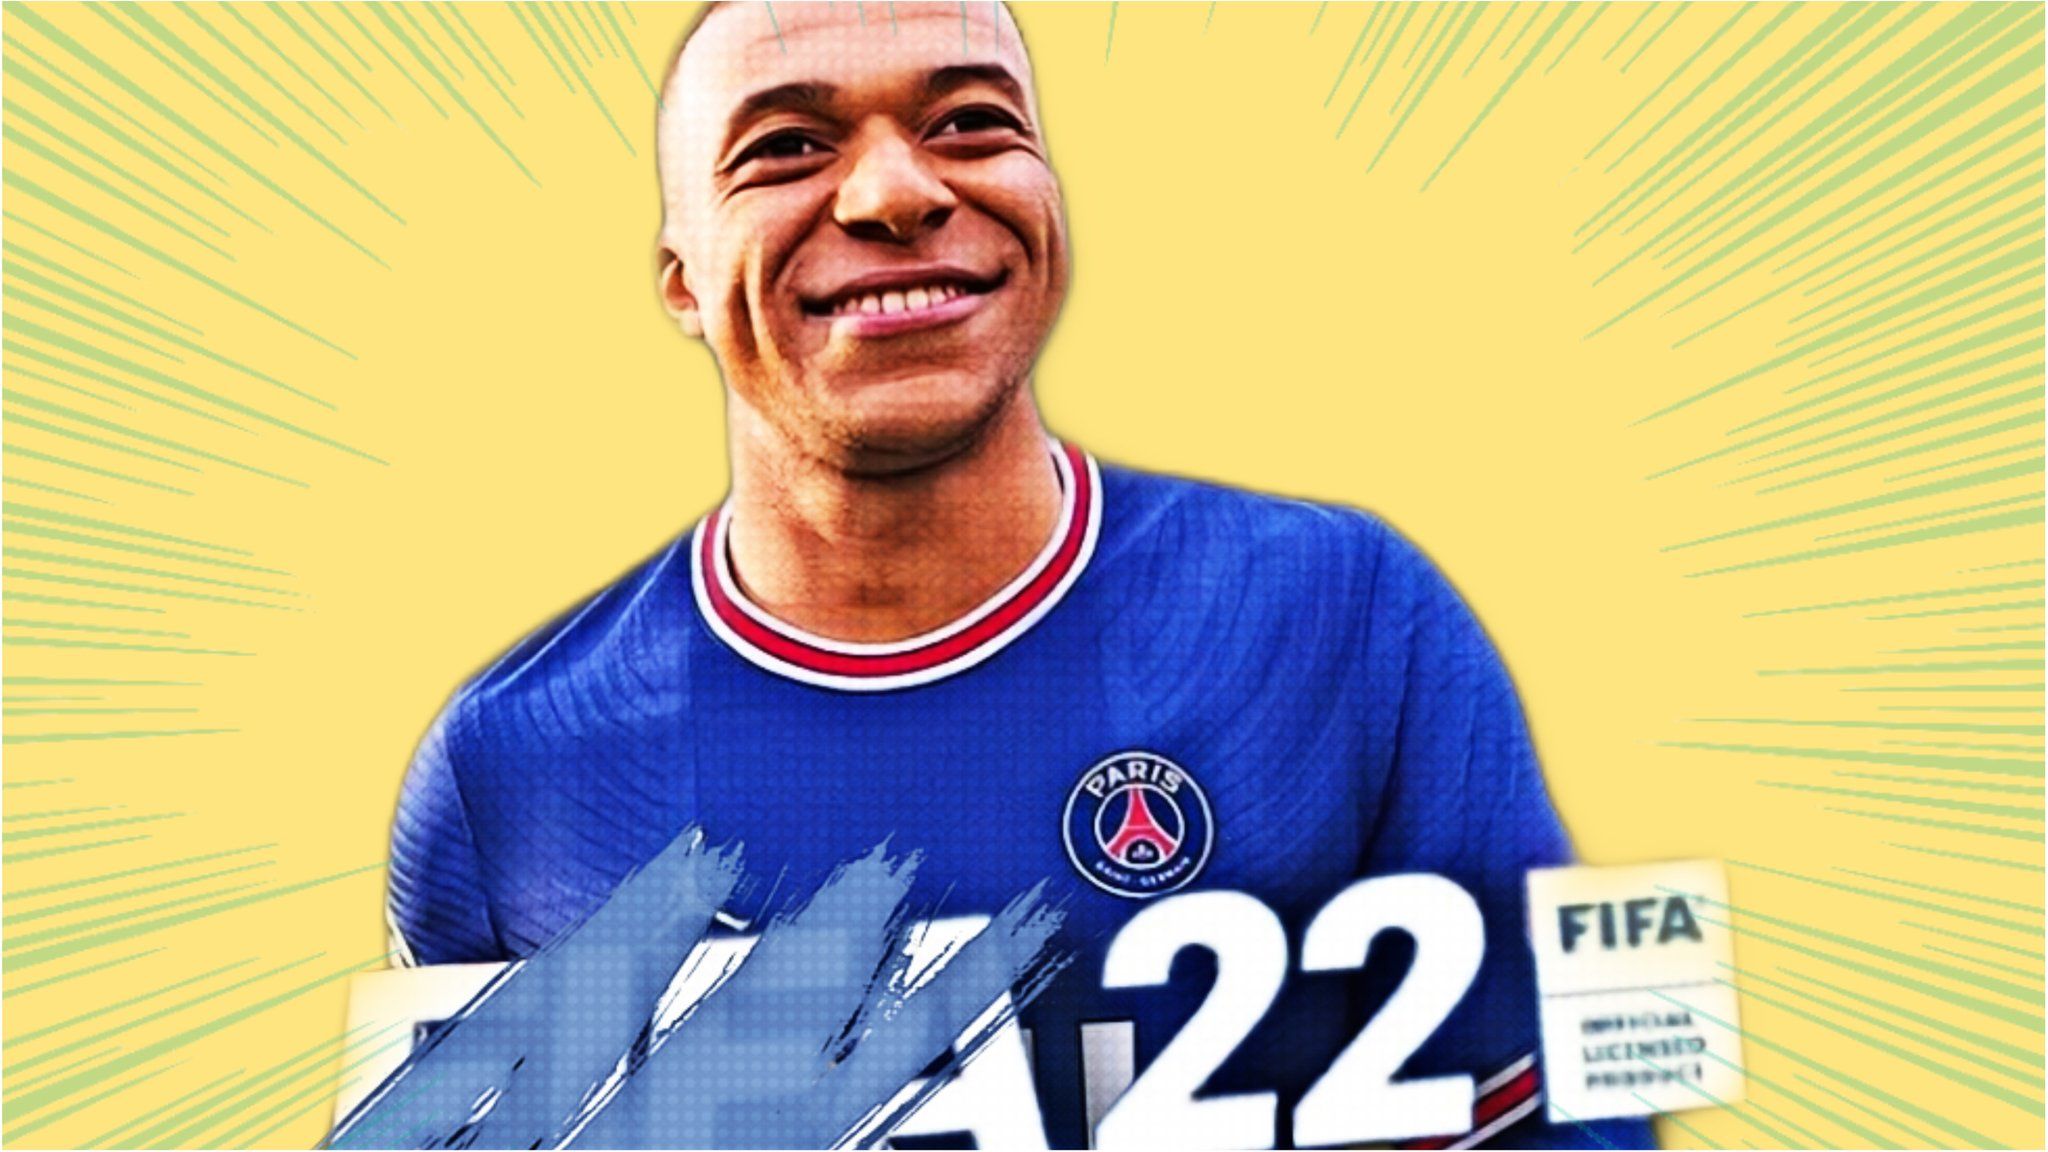 Mbappe as seen on fifa cover in pop art style.